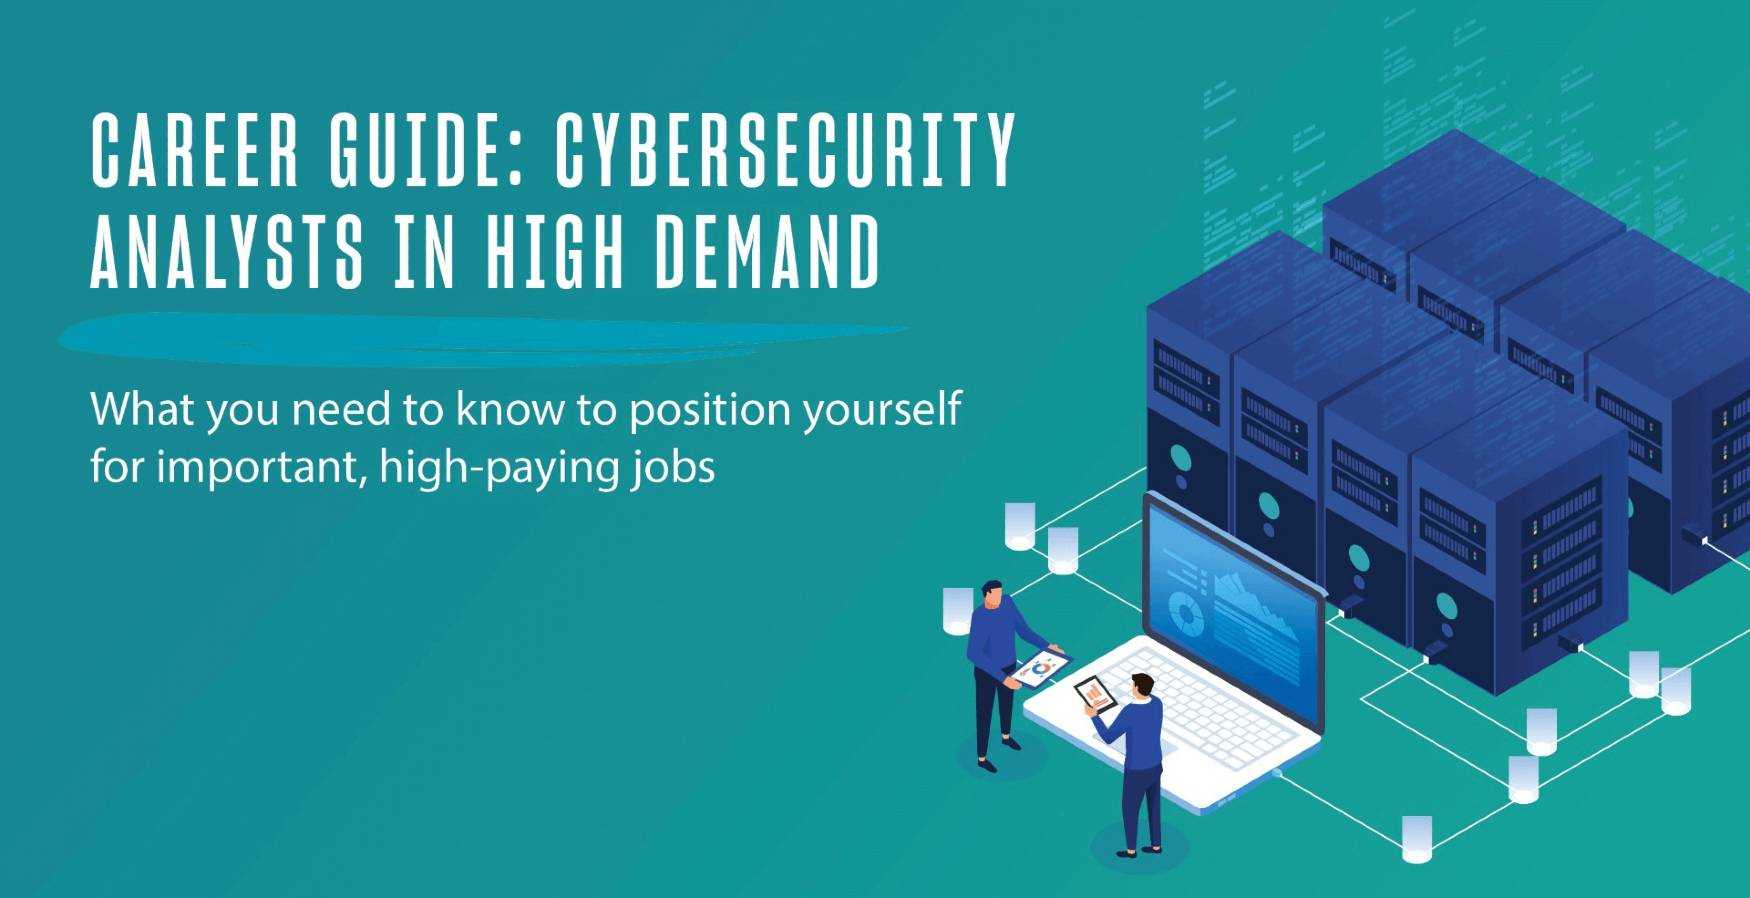 USD Cyber Security Analyst Career Guide